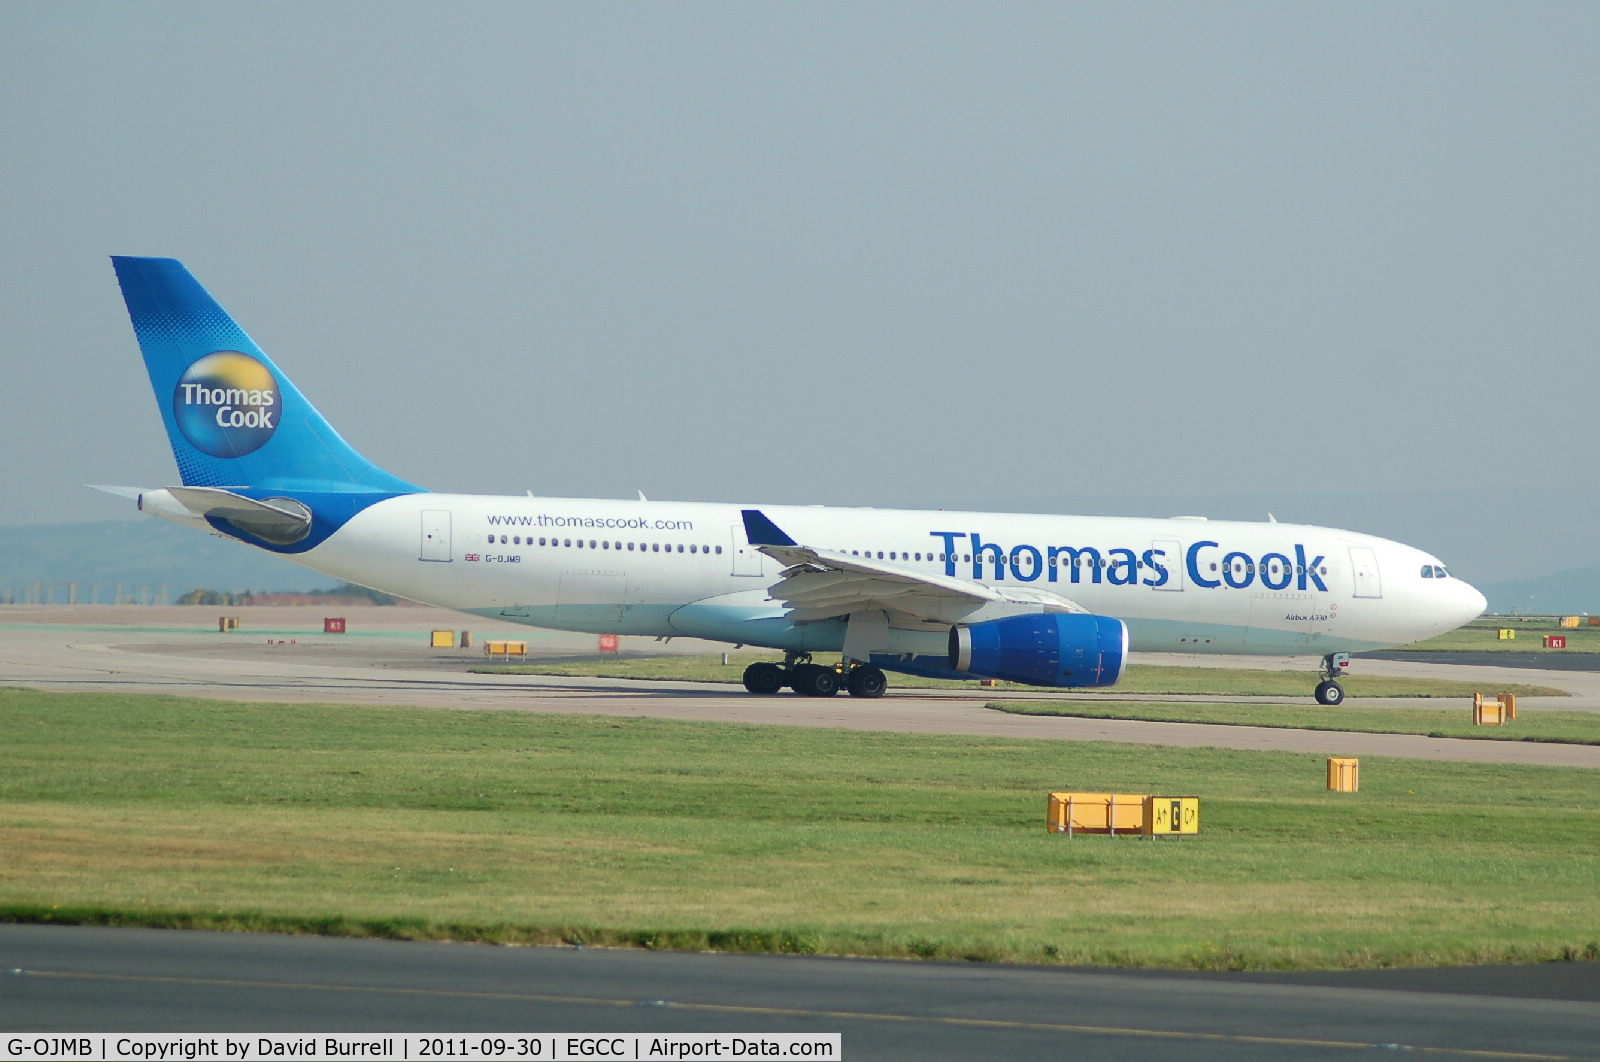 G-OJMB, 2001 Airbus A330-243 C/N 427, Thomas Cook Airbus A330 Taxiing at Manchester Airport.